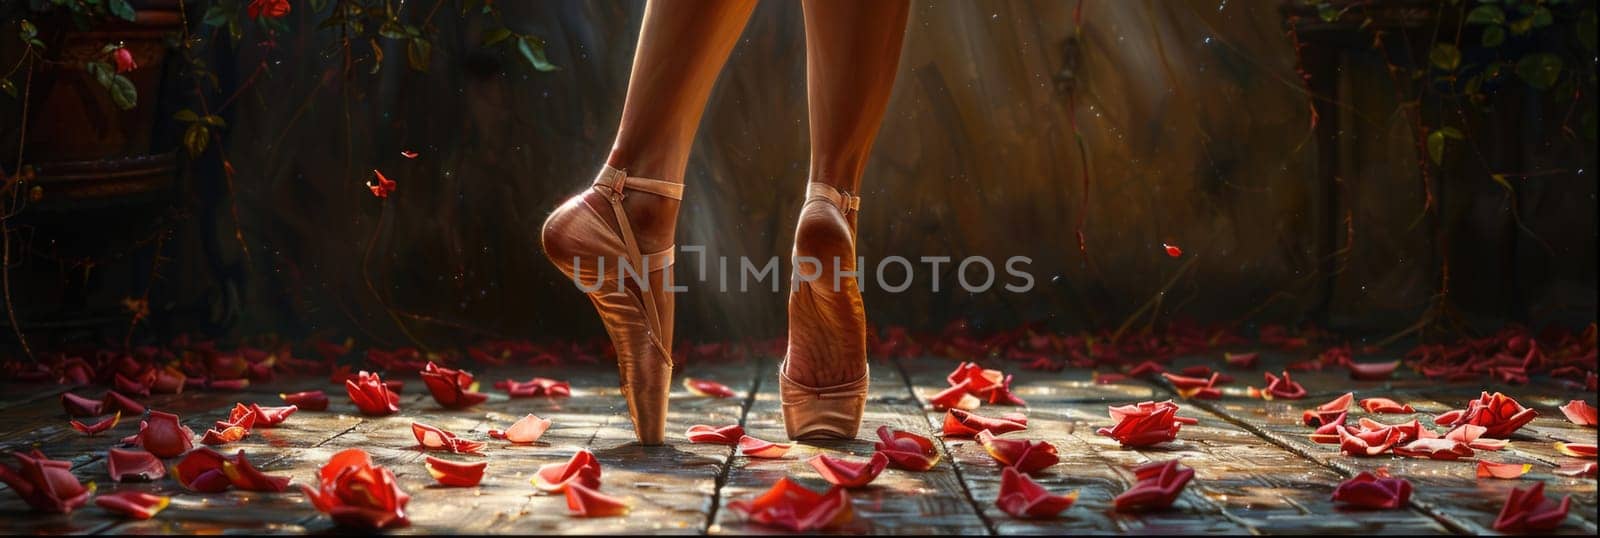 Painting of Womans Legs and Shoes by but_photo